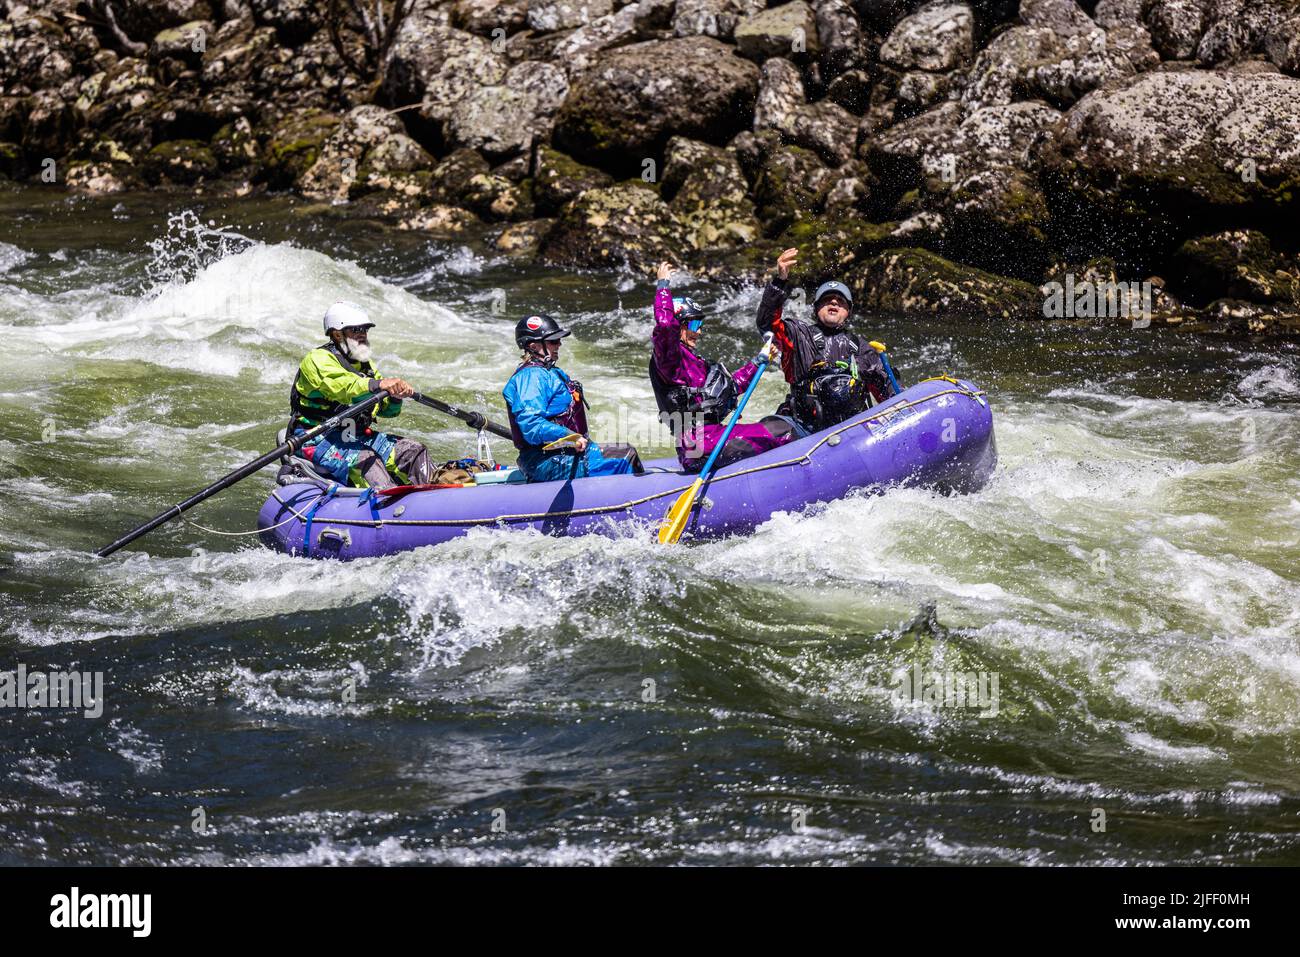 Koskia, Idaho/USA - June 22, 2022: Rafters enjoying the high waters in the Lochsa river after a very wet winter and spring 2021/2022. Stock Photo